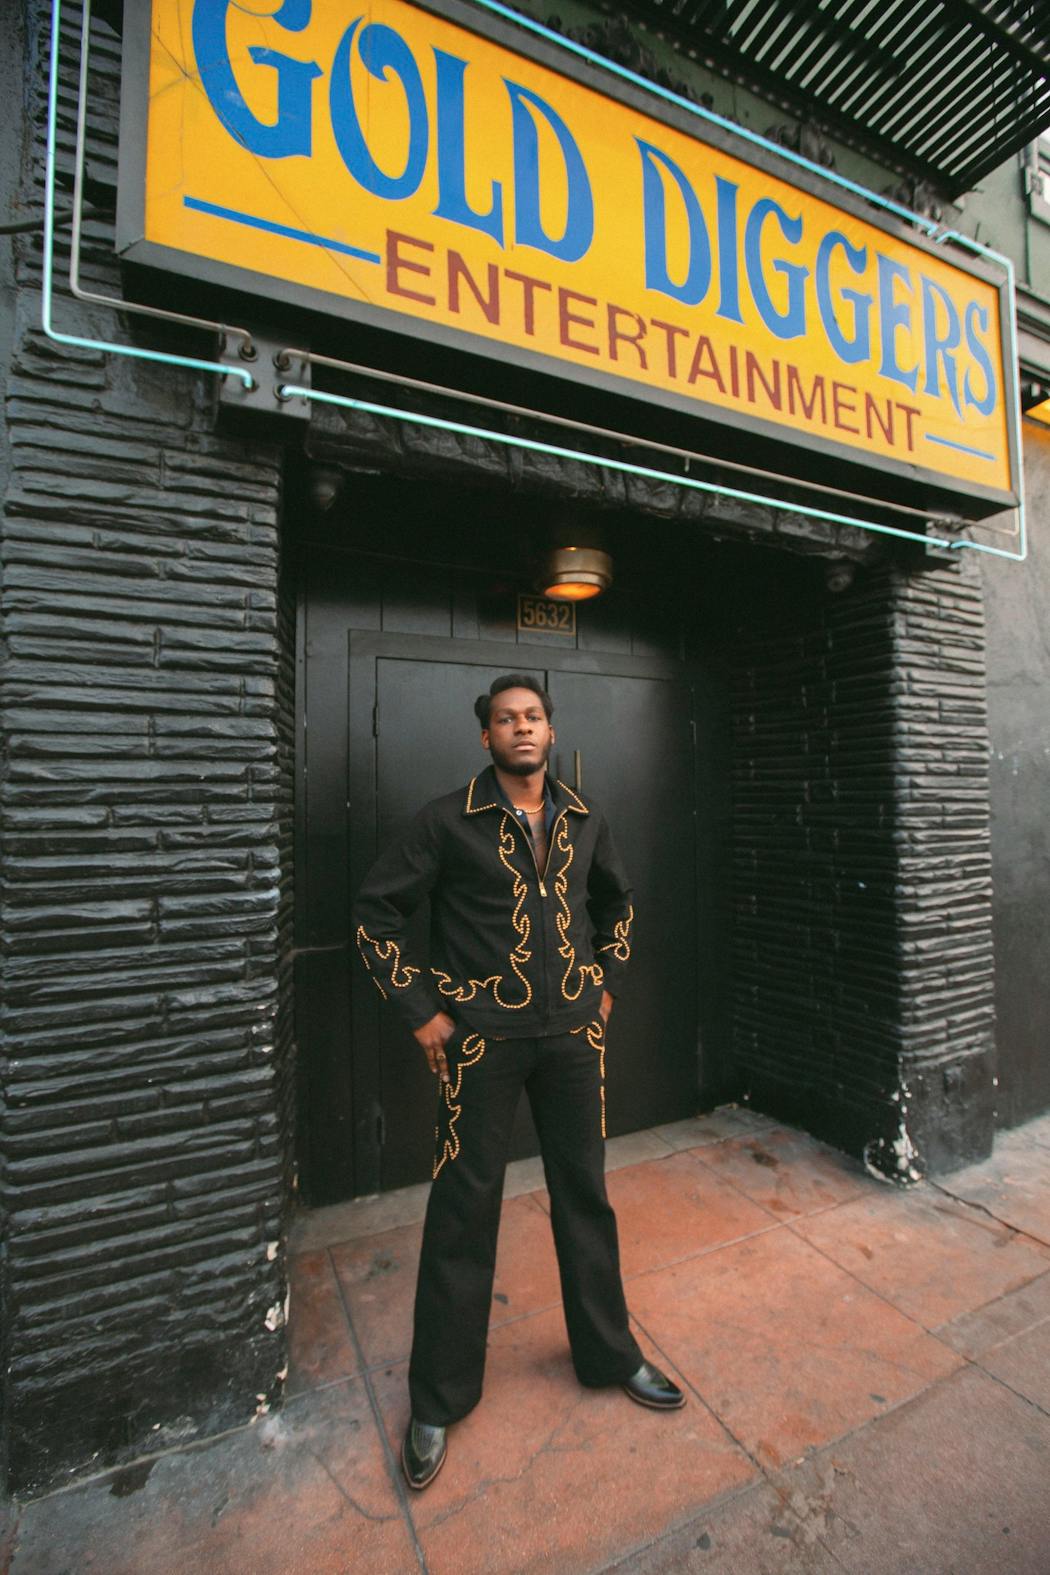 Leon Bridges outside the studio that gave his new record its name.